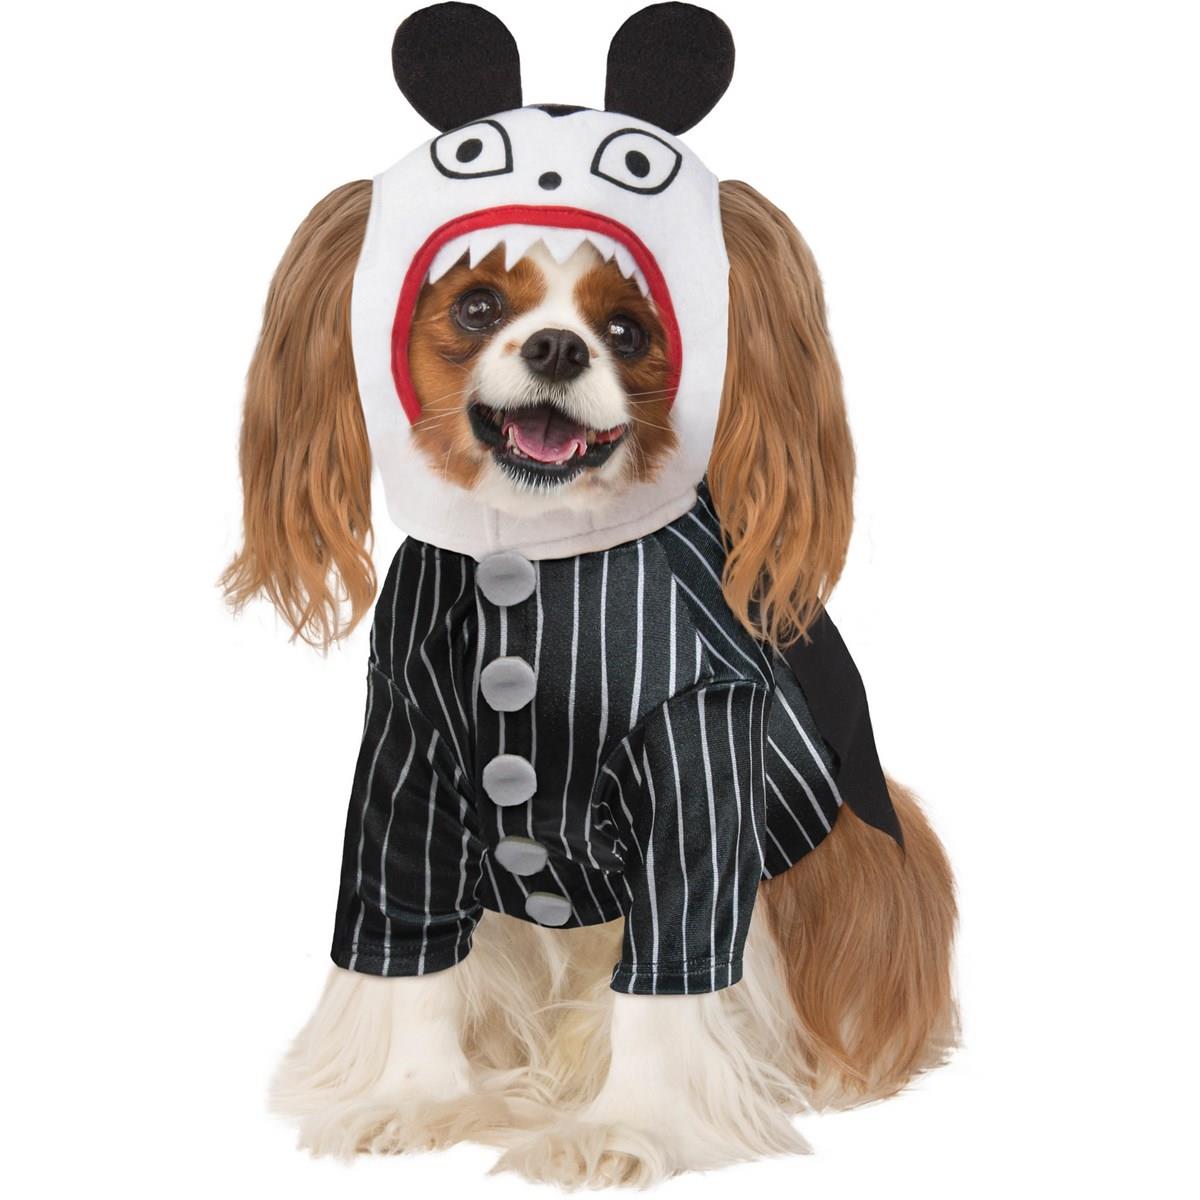 283945 Scary Teddy Pet Costume, Large 22